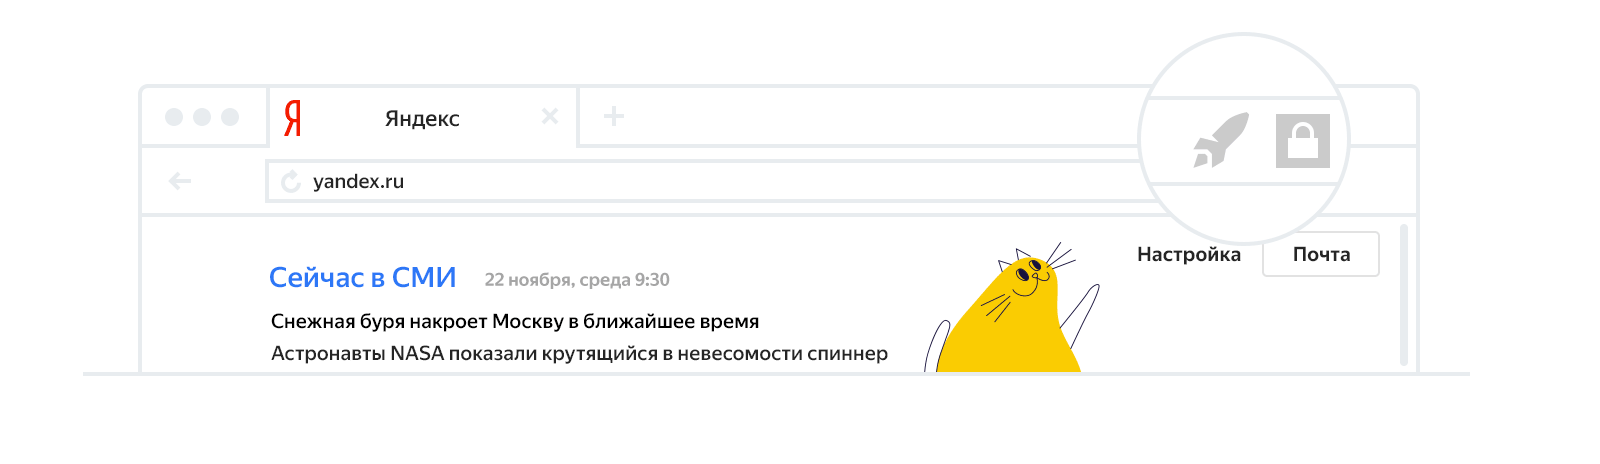 Yandex Turbo pages